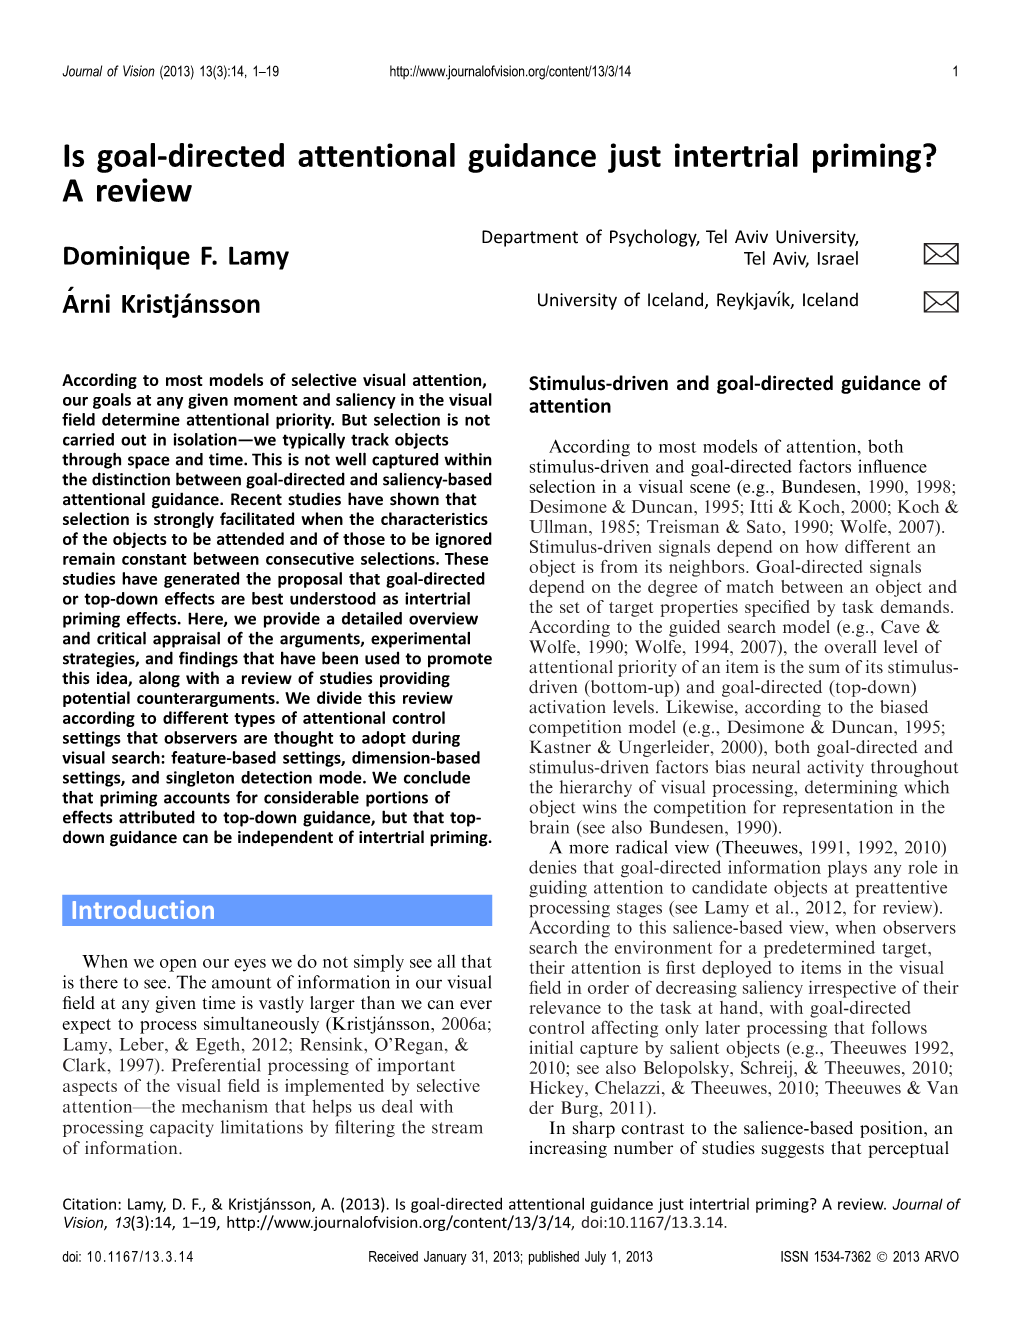 Is Goal-Directed Attentional Guidance Just Intertrial Priming? a Review Department of Psychology, Tel Aviv University, Dominique F